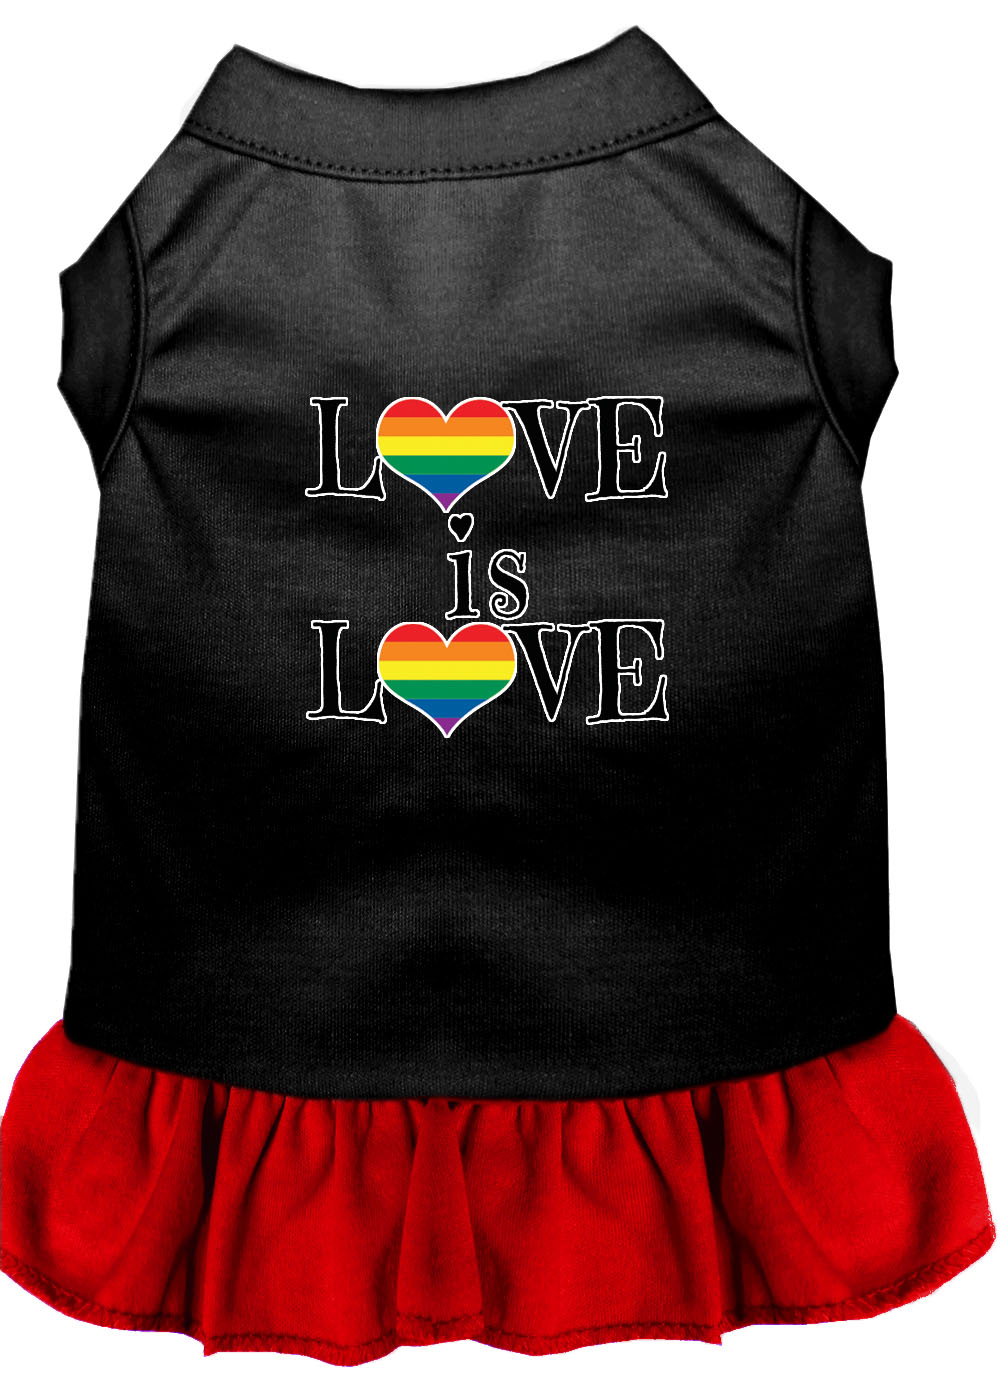 Love is Love Screen Print Dog Dress Black with Red Med